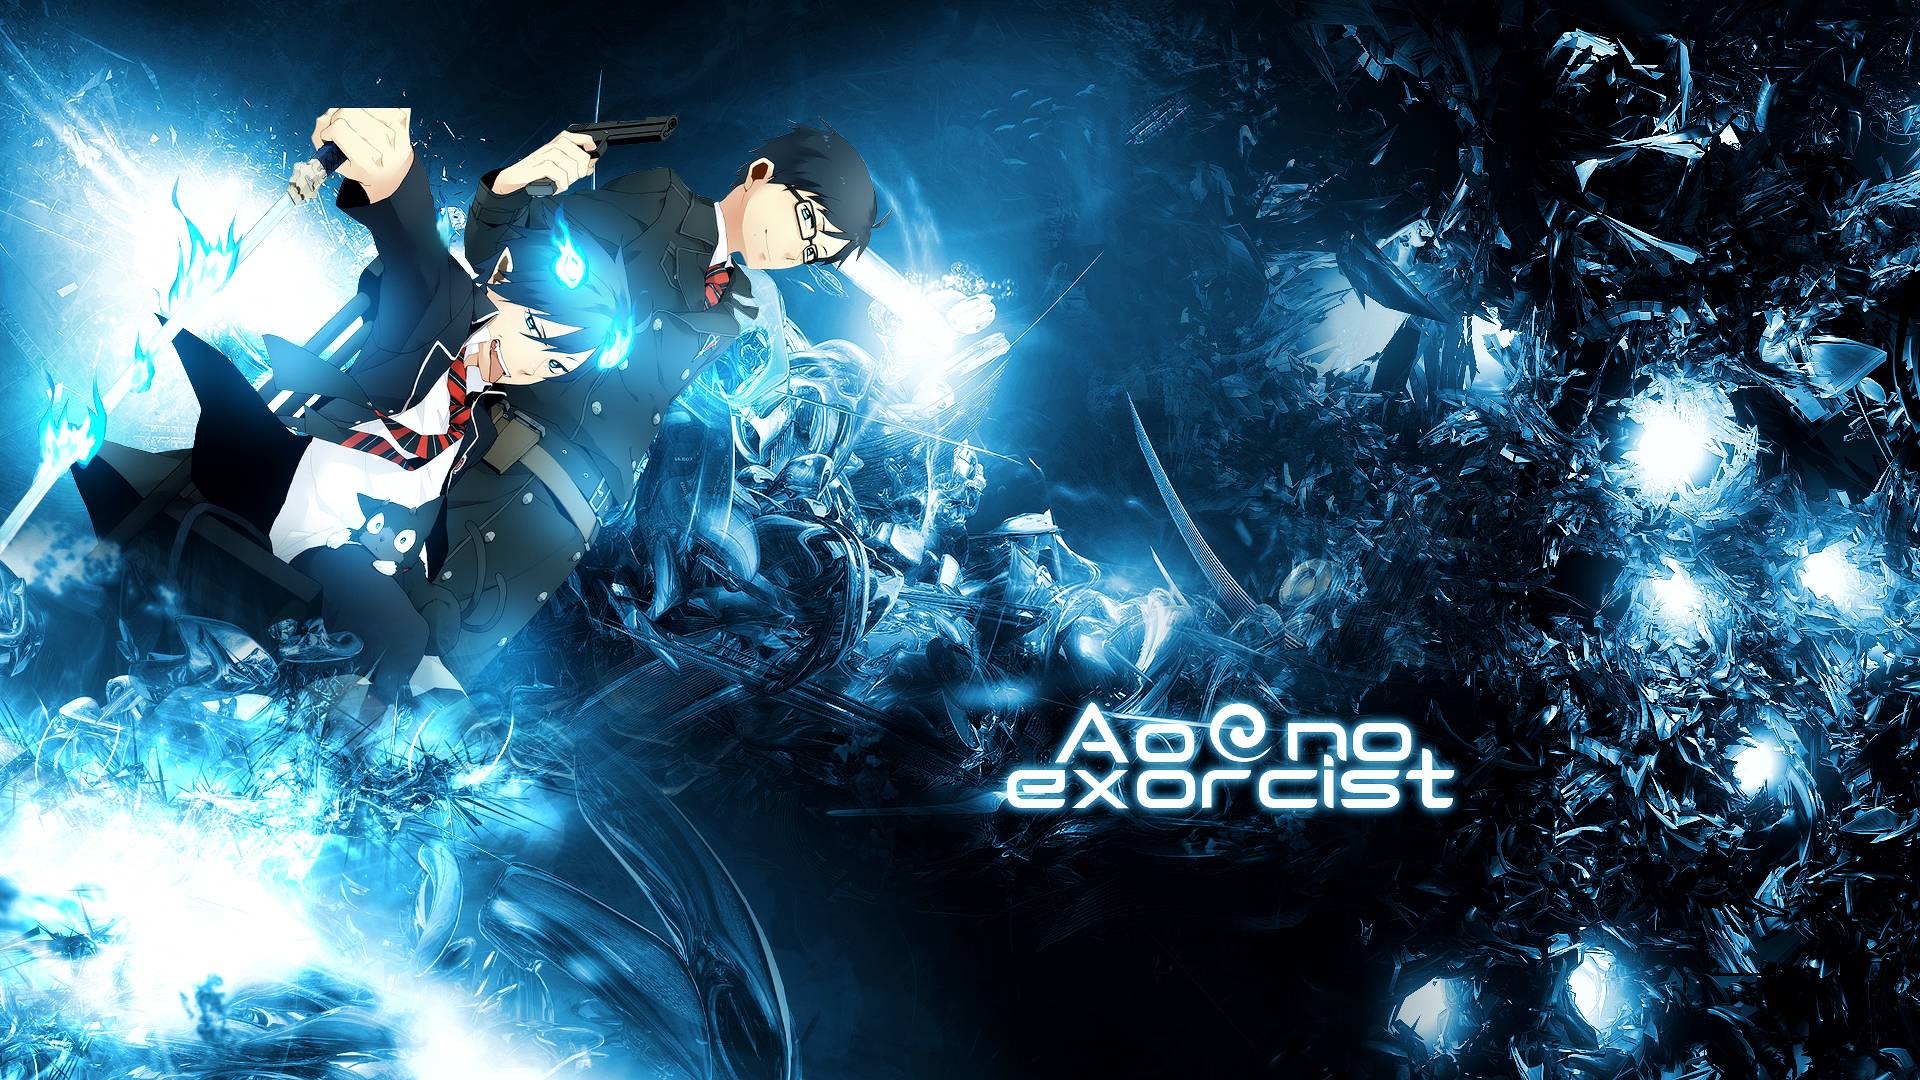 Blue Exorcist Wallpapers Wallpaper Cave